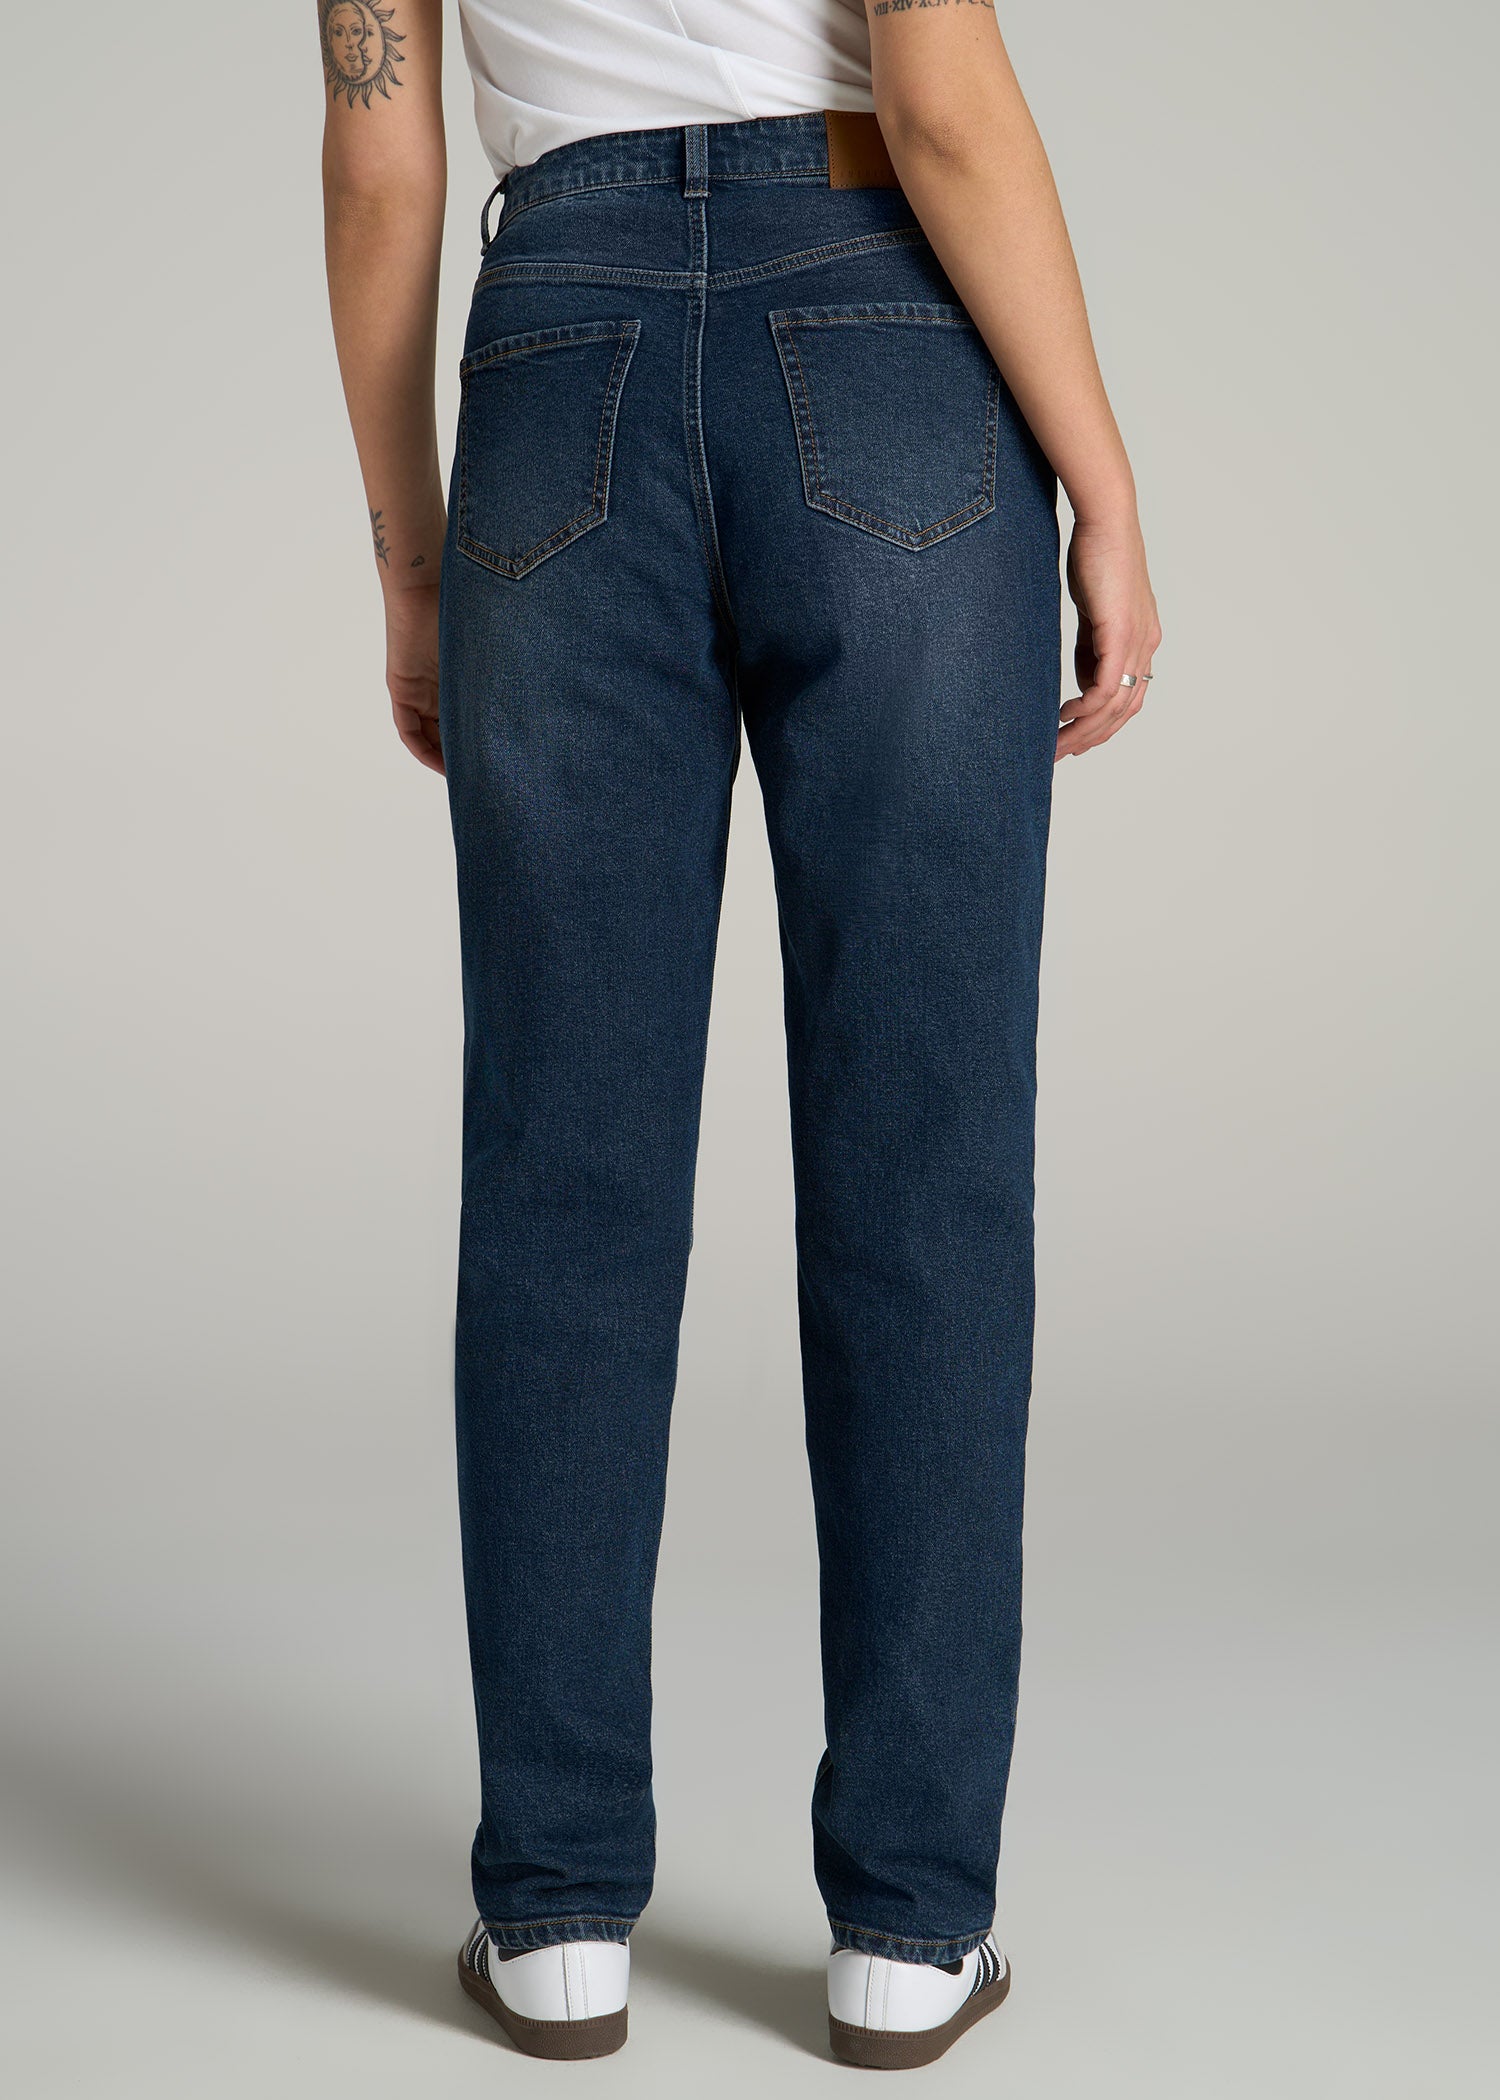 Women's Mid Rise Relaxed Straight Jeans